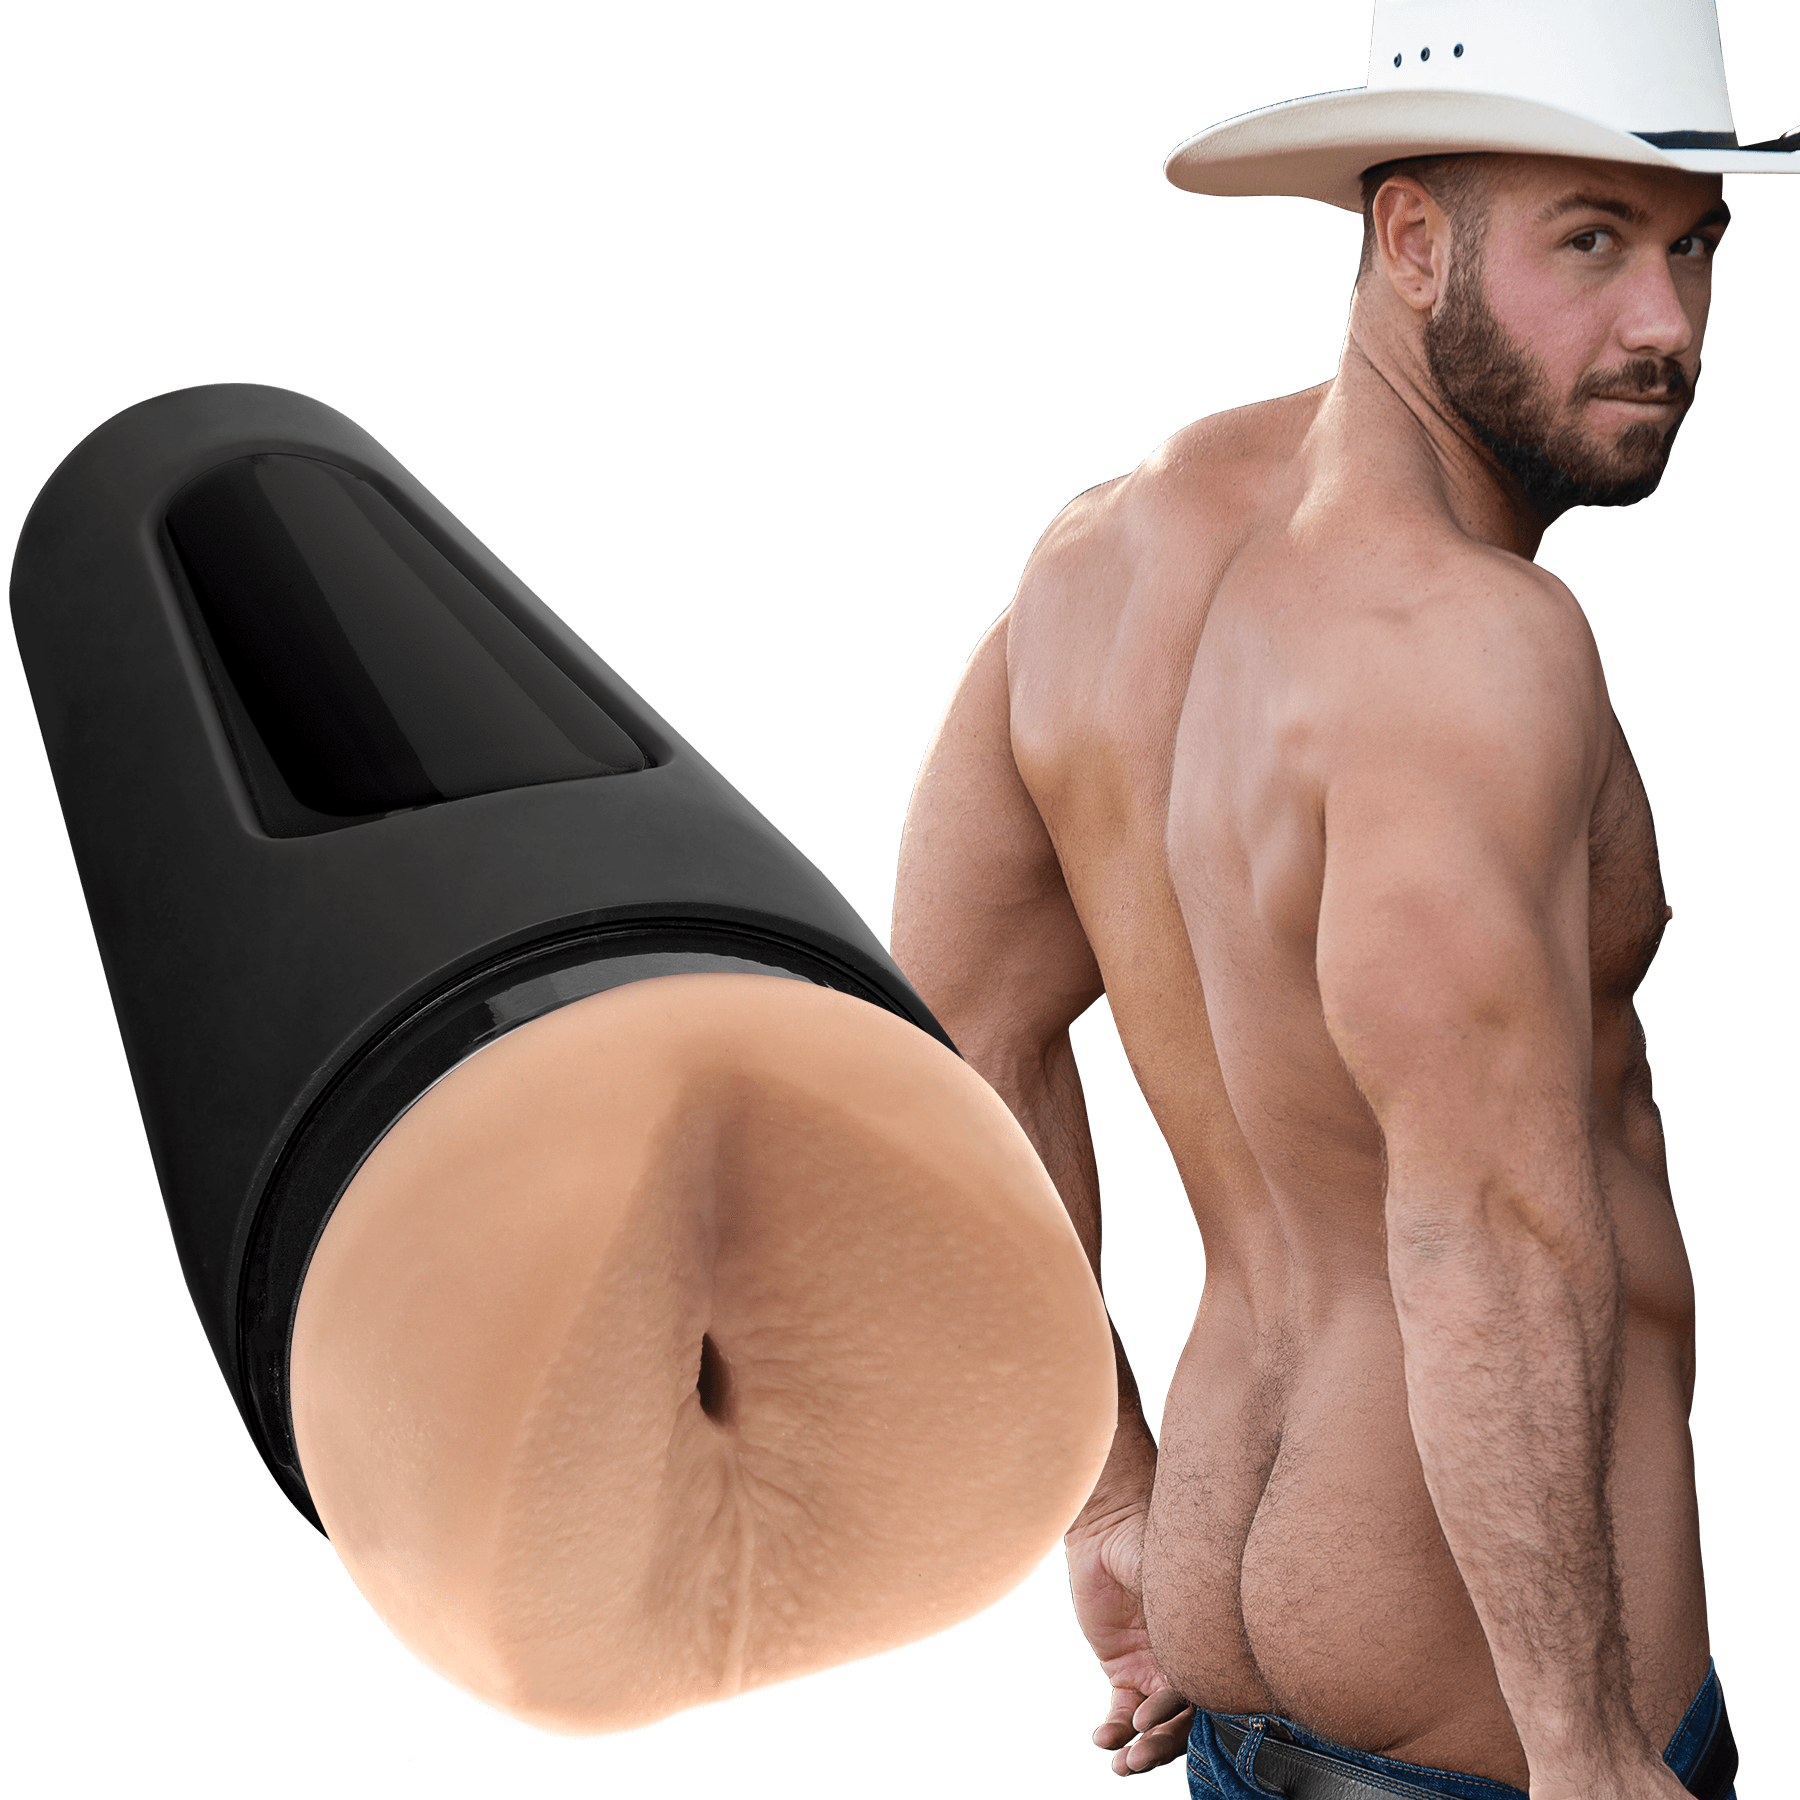 Doc Johnson Chad White Ass - Buy At Luxury Toy X - Free 3-Day Shipping